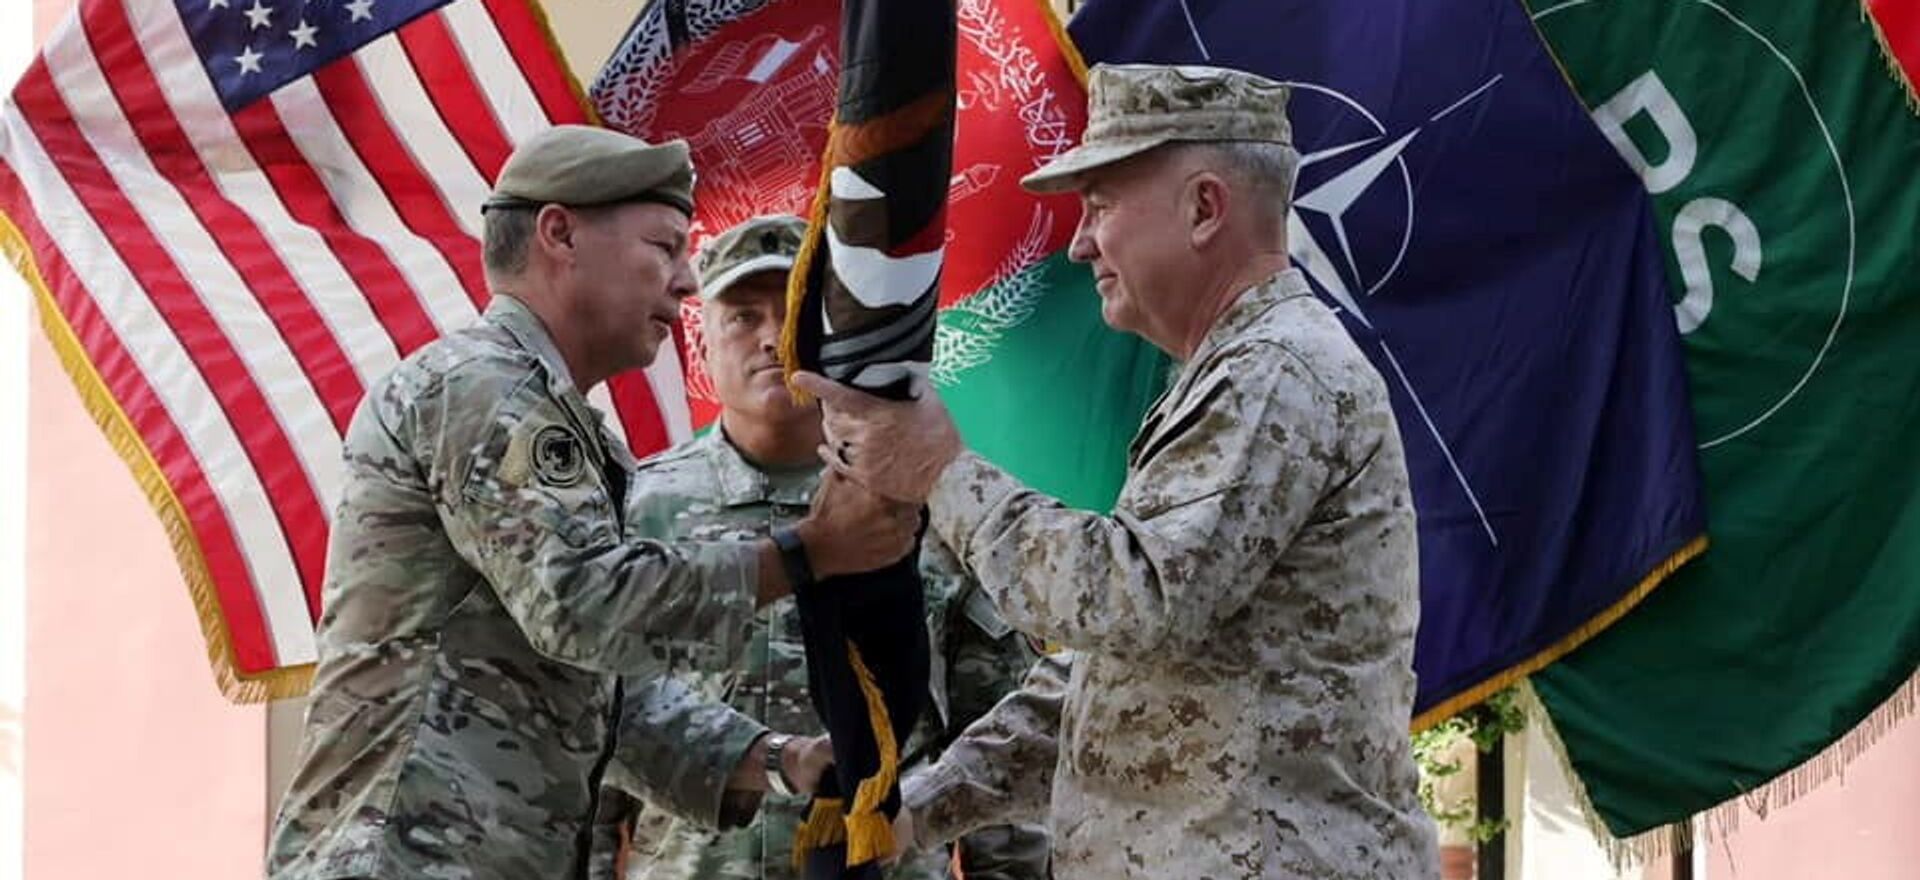 General Austin Scott Miller, commander of U.S. forces and NATO's Resolute Support Mission, hands over his command to U.S. Marine General Kenneth McKenzie, during a ceremony in Kabul, Afghanistan July 12, 2021 - Sputnik International, 1920, 16.08.2021